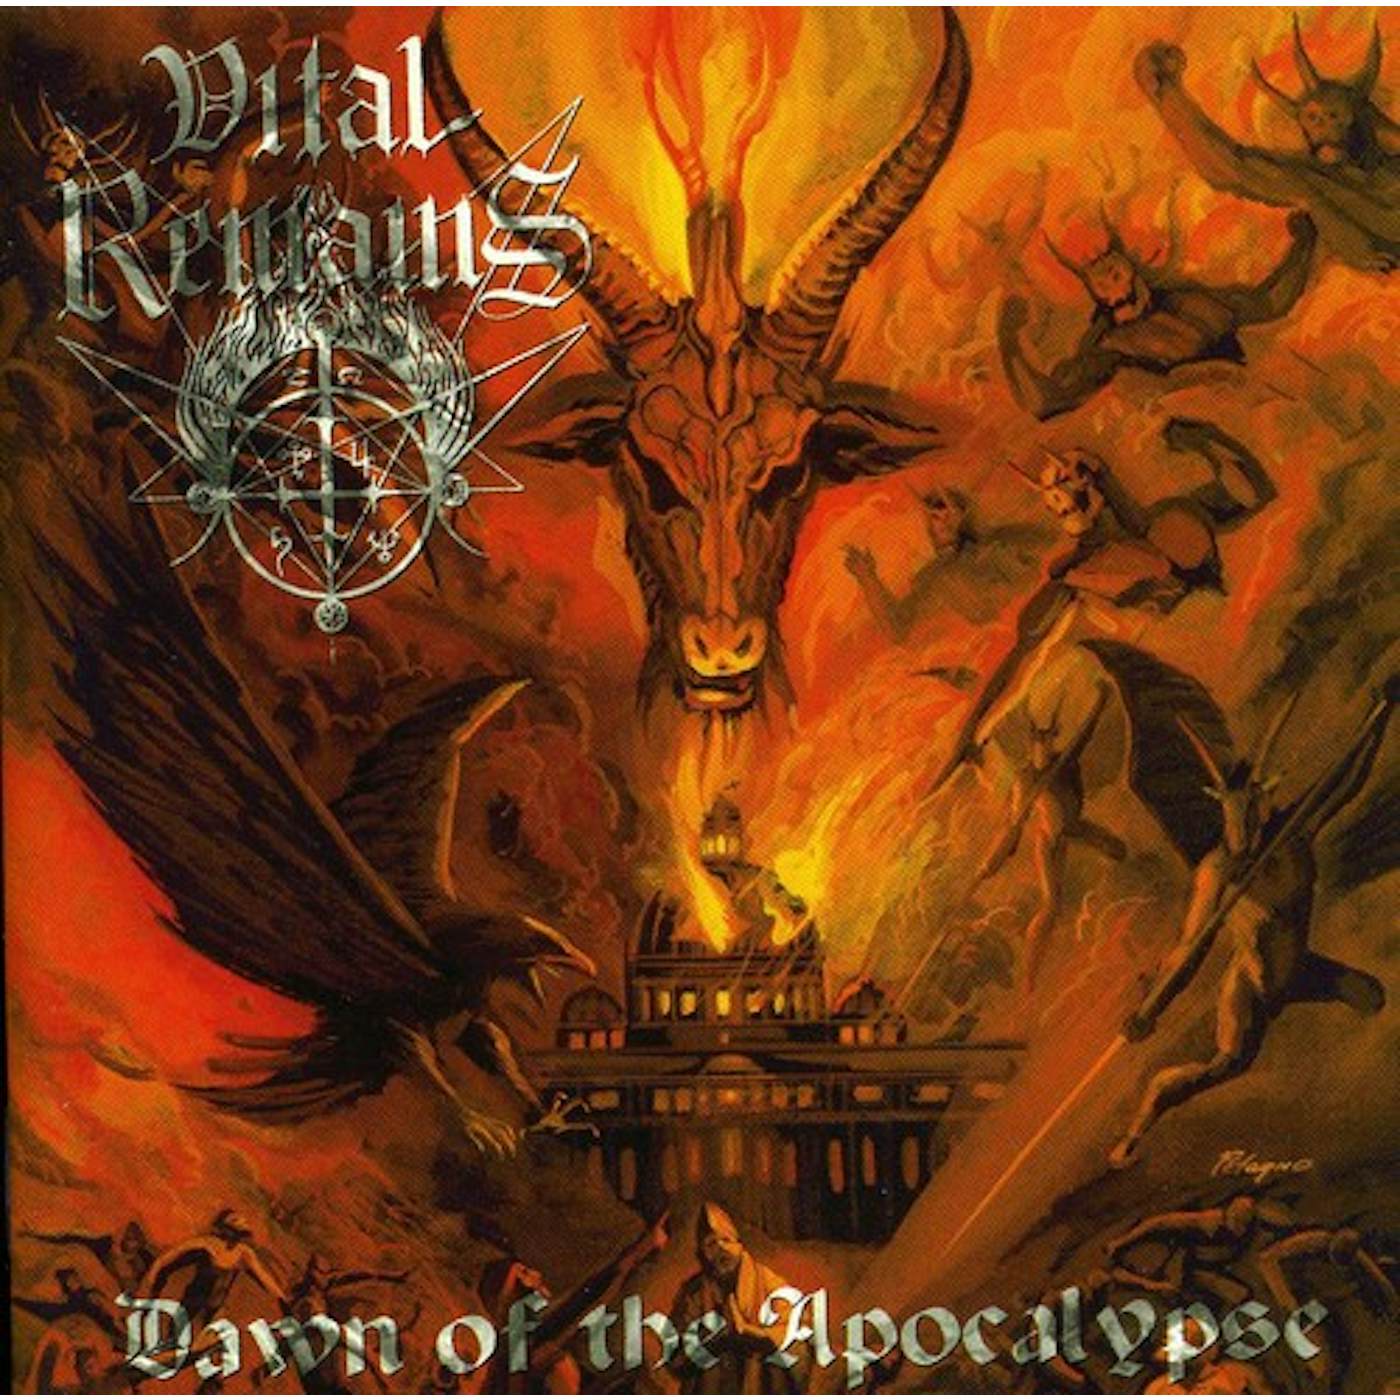 Vital Remains DAWN OF THE APOCALYPSE CD